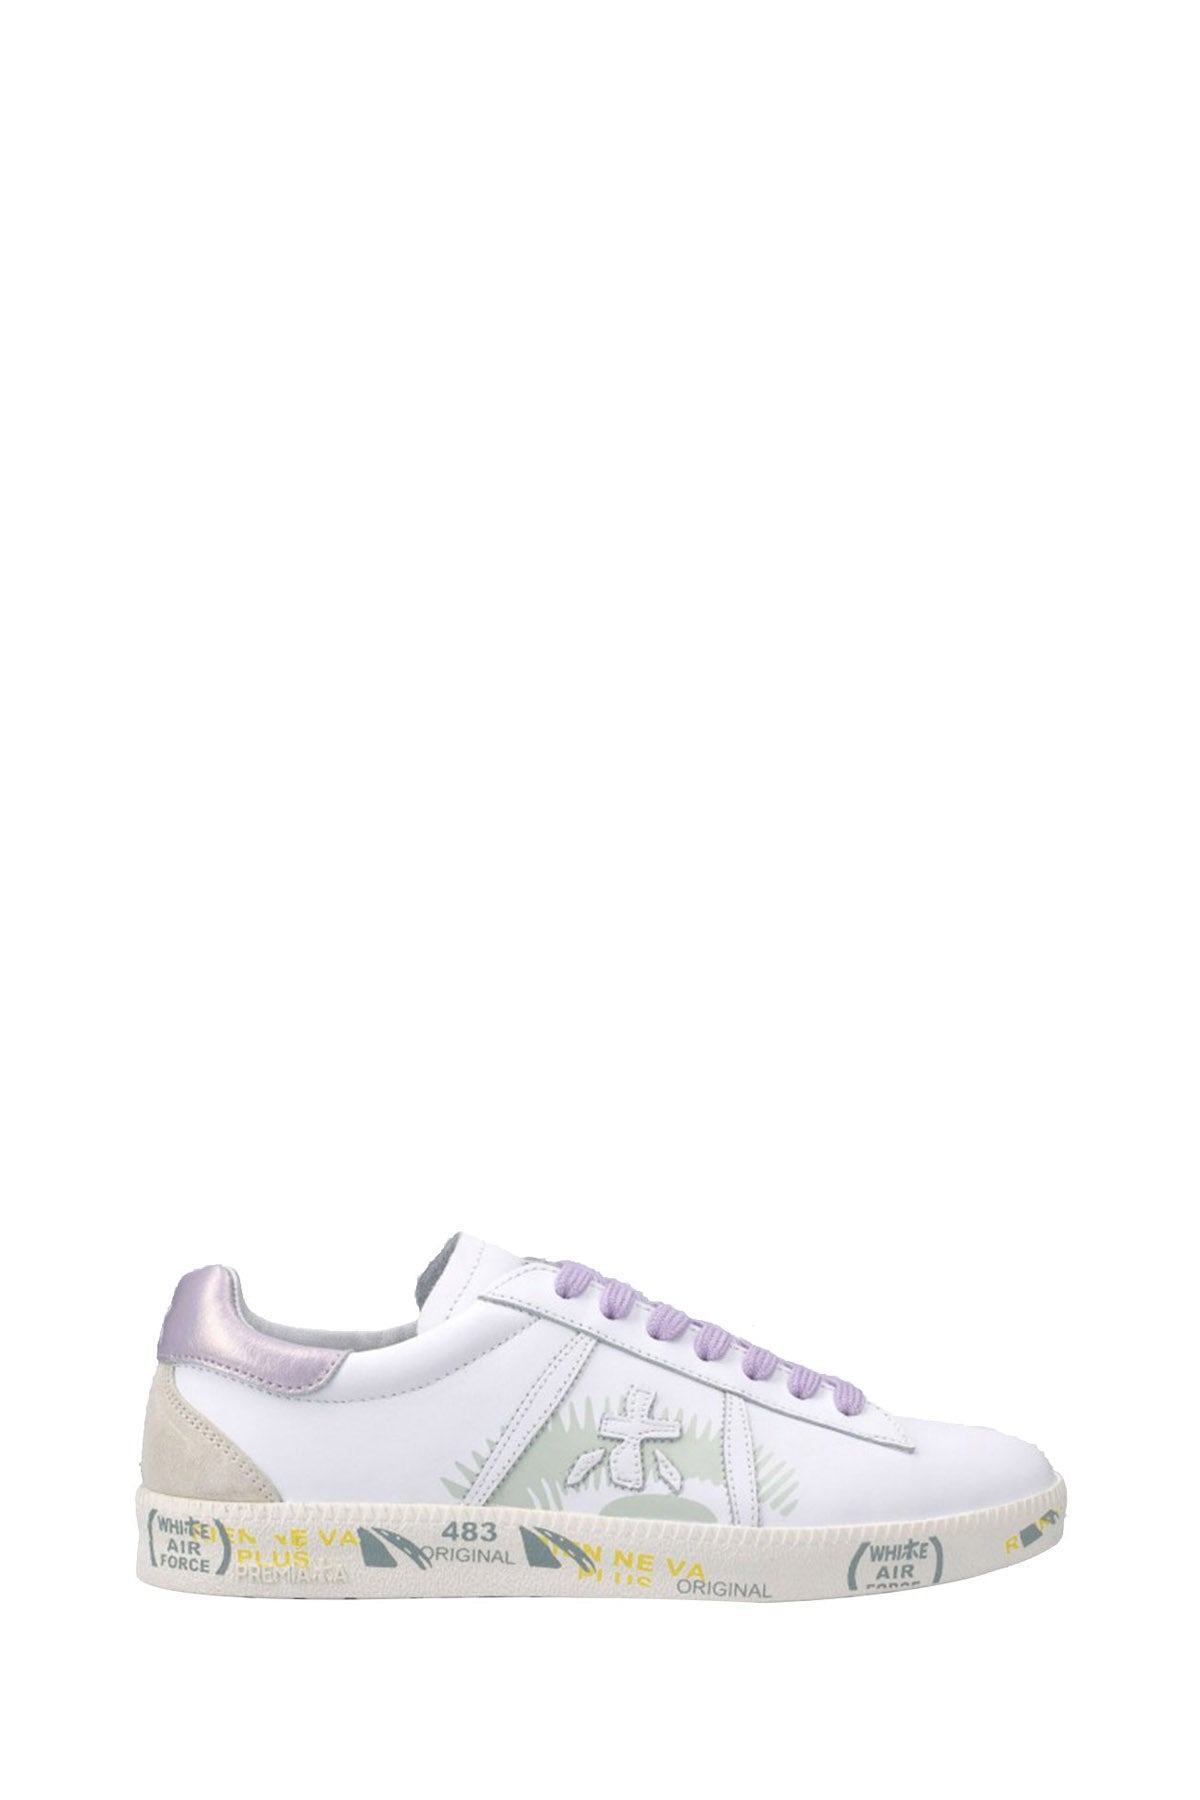 Sneaker Andyd 5139 Bianco/Lilla